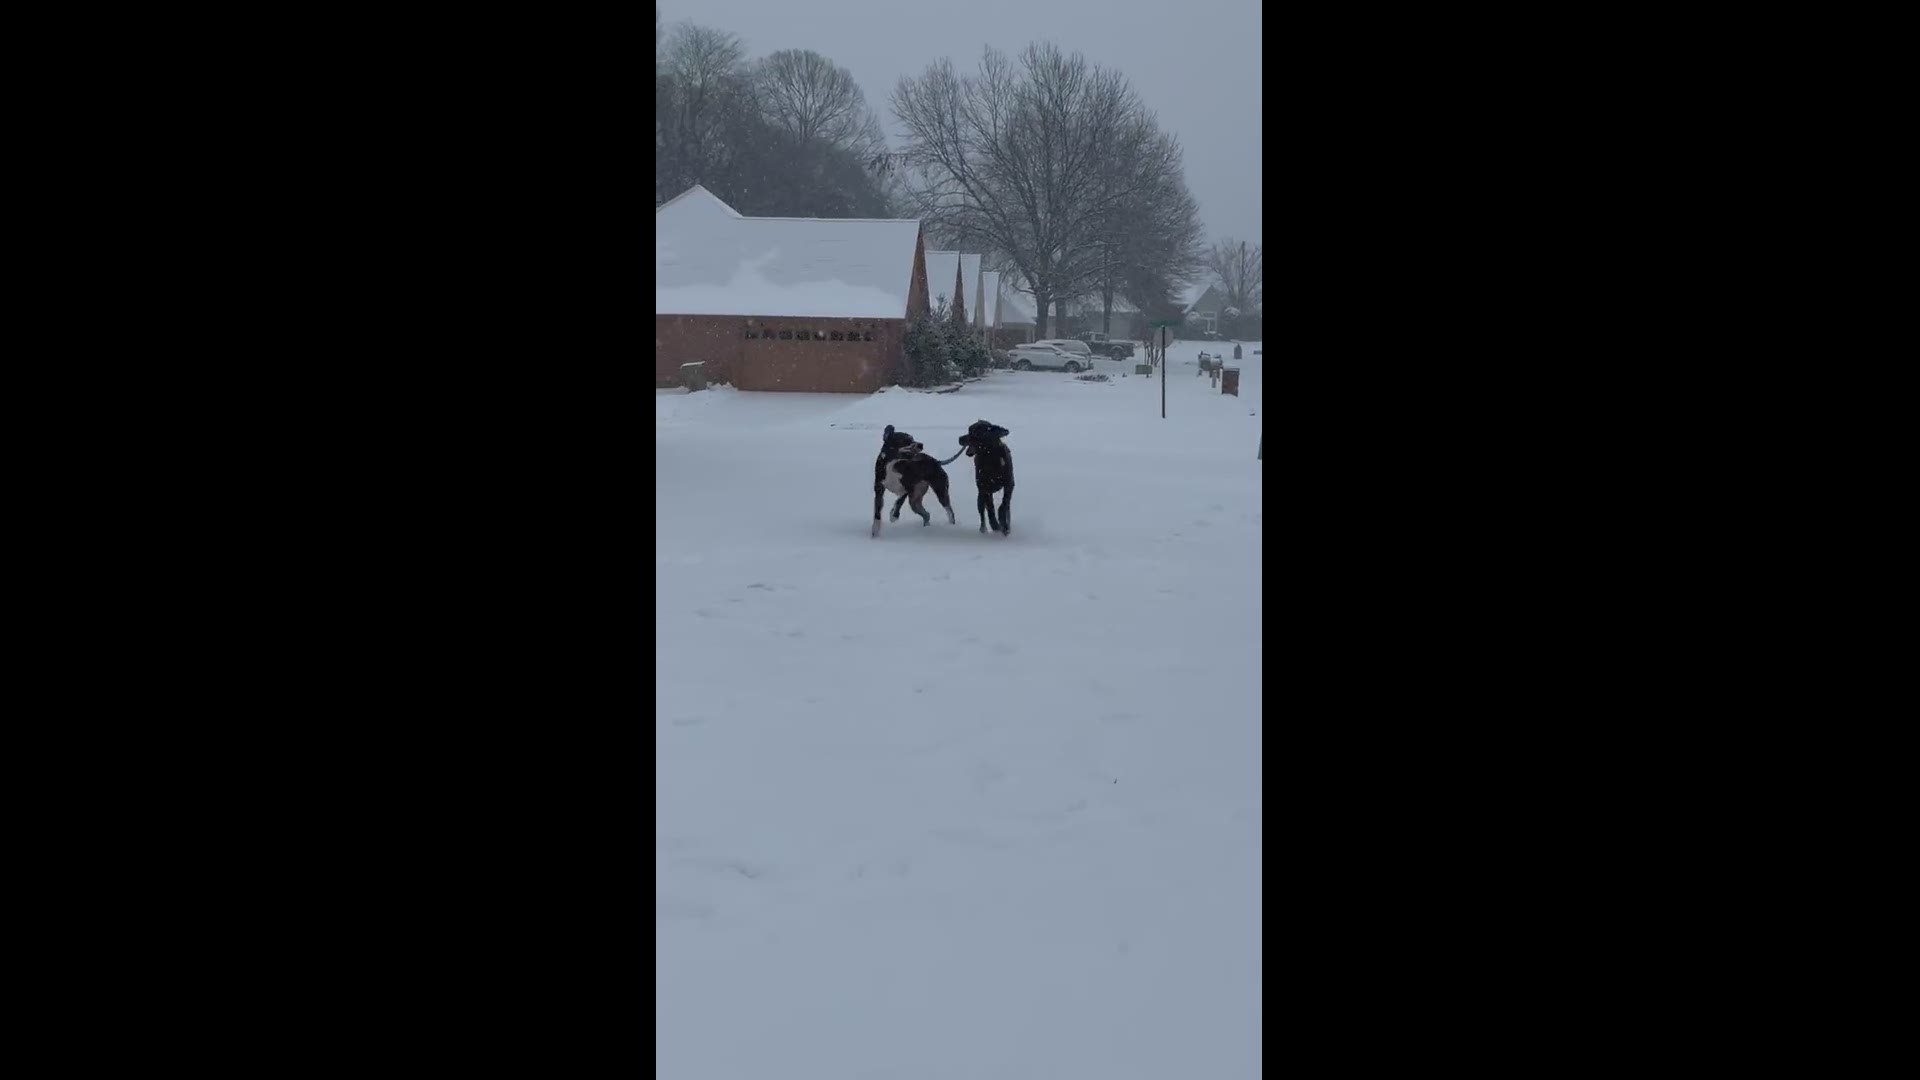 “Chance” & “Remington” love playing together. The snow made it so much more fun!  their first snowfall. - Memphis
Credit: Christine Wheaton